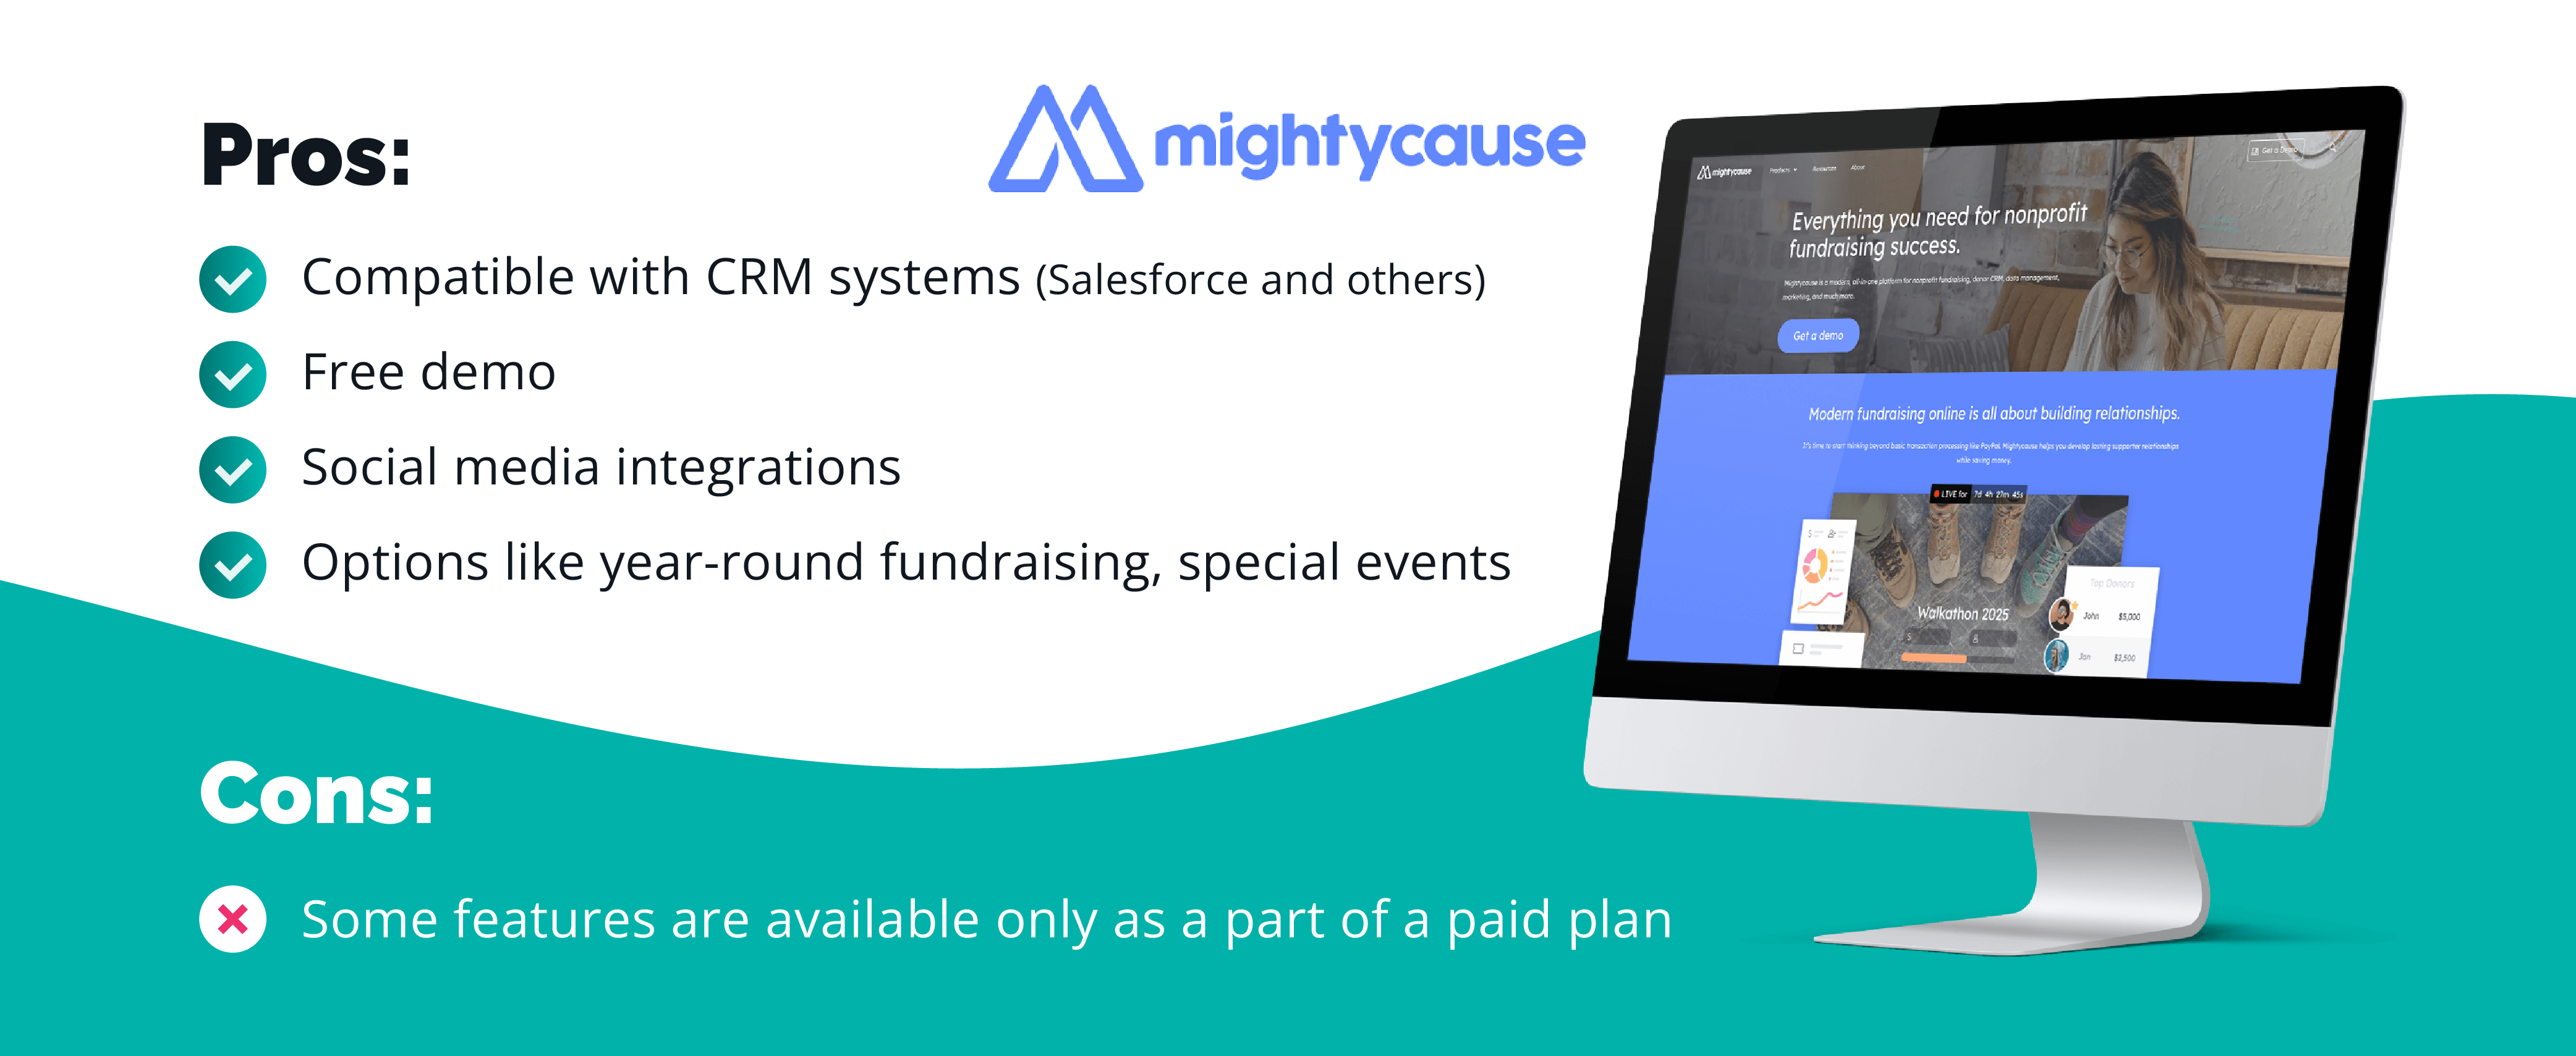 Pros & Cons of Mightycause